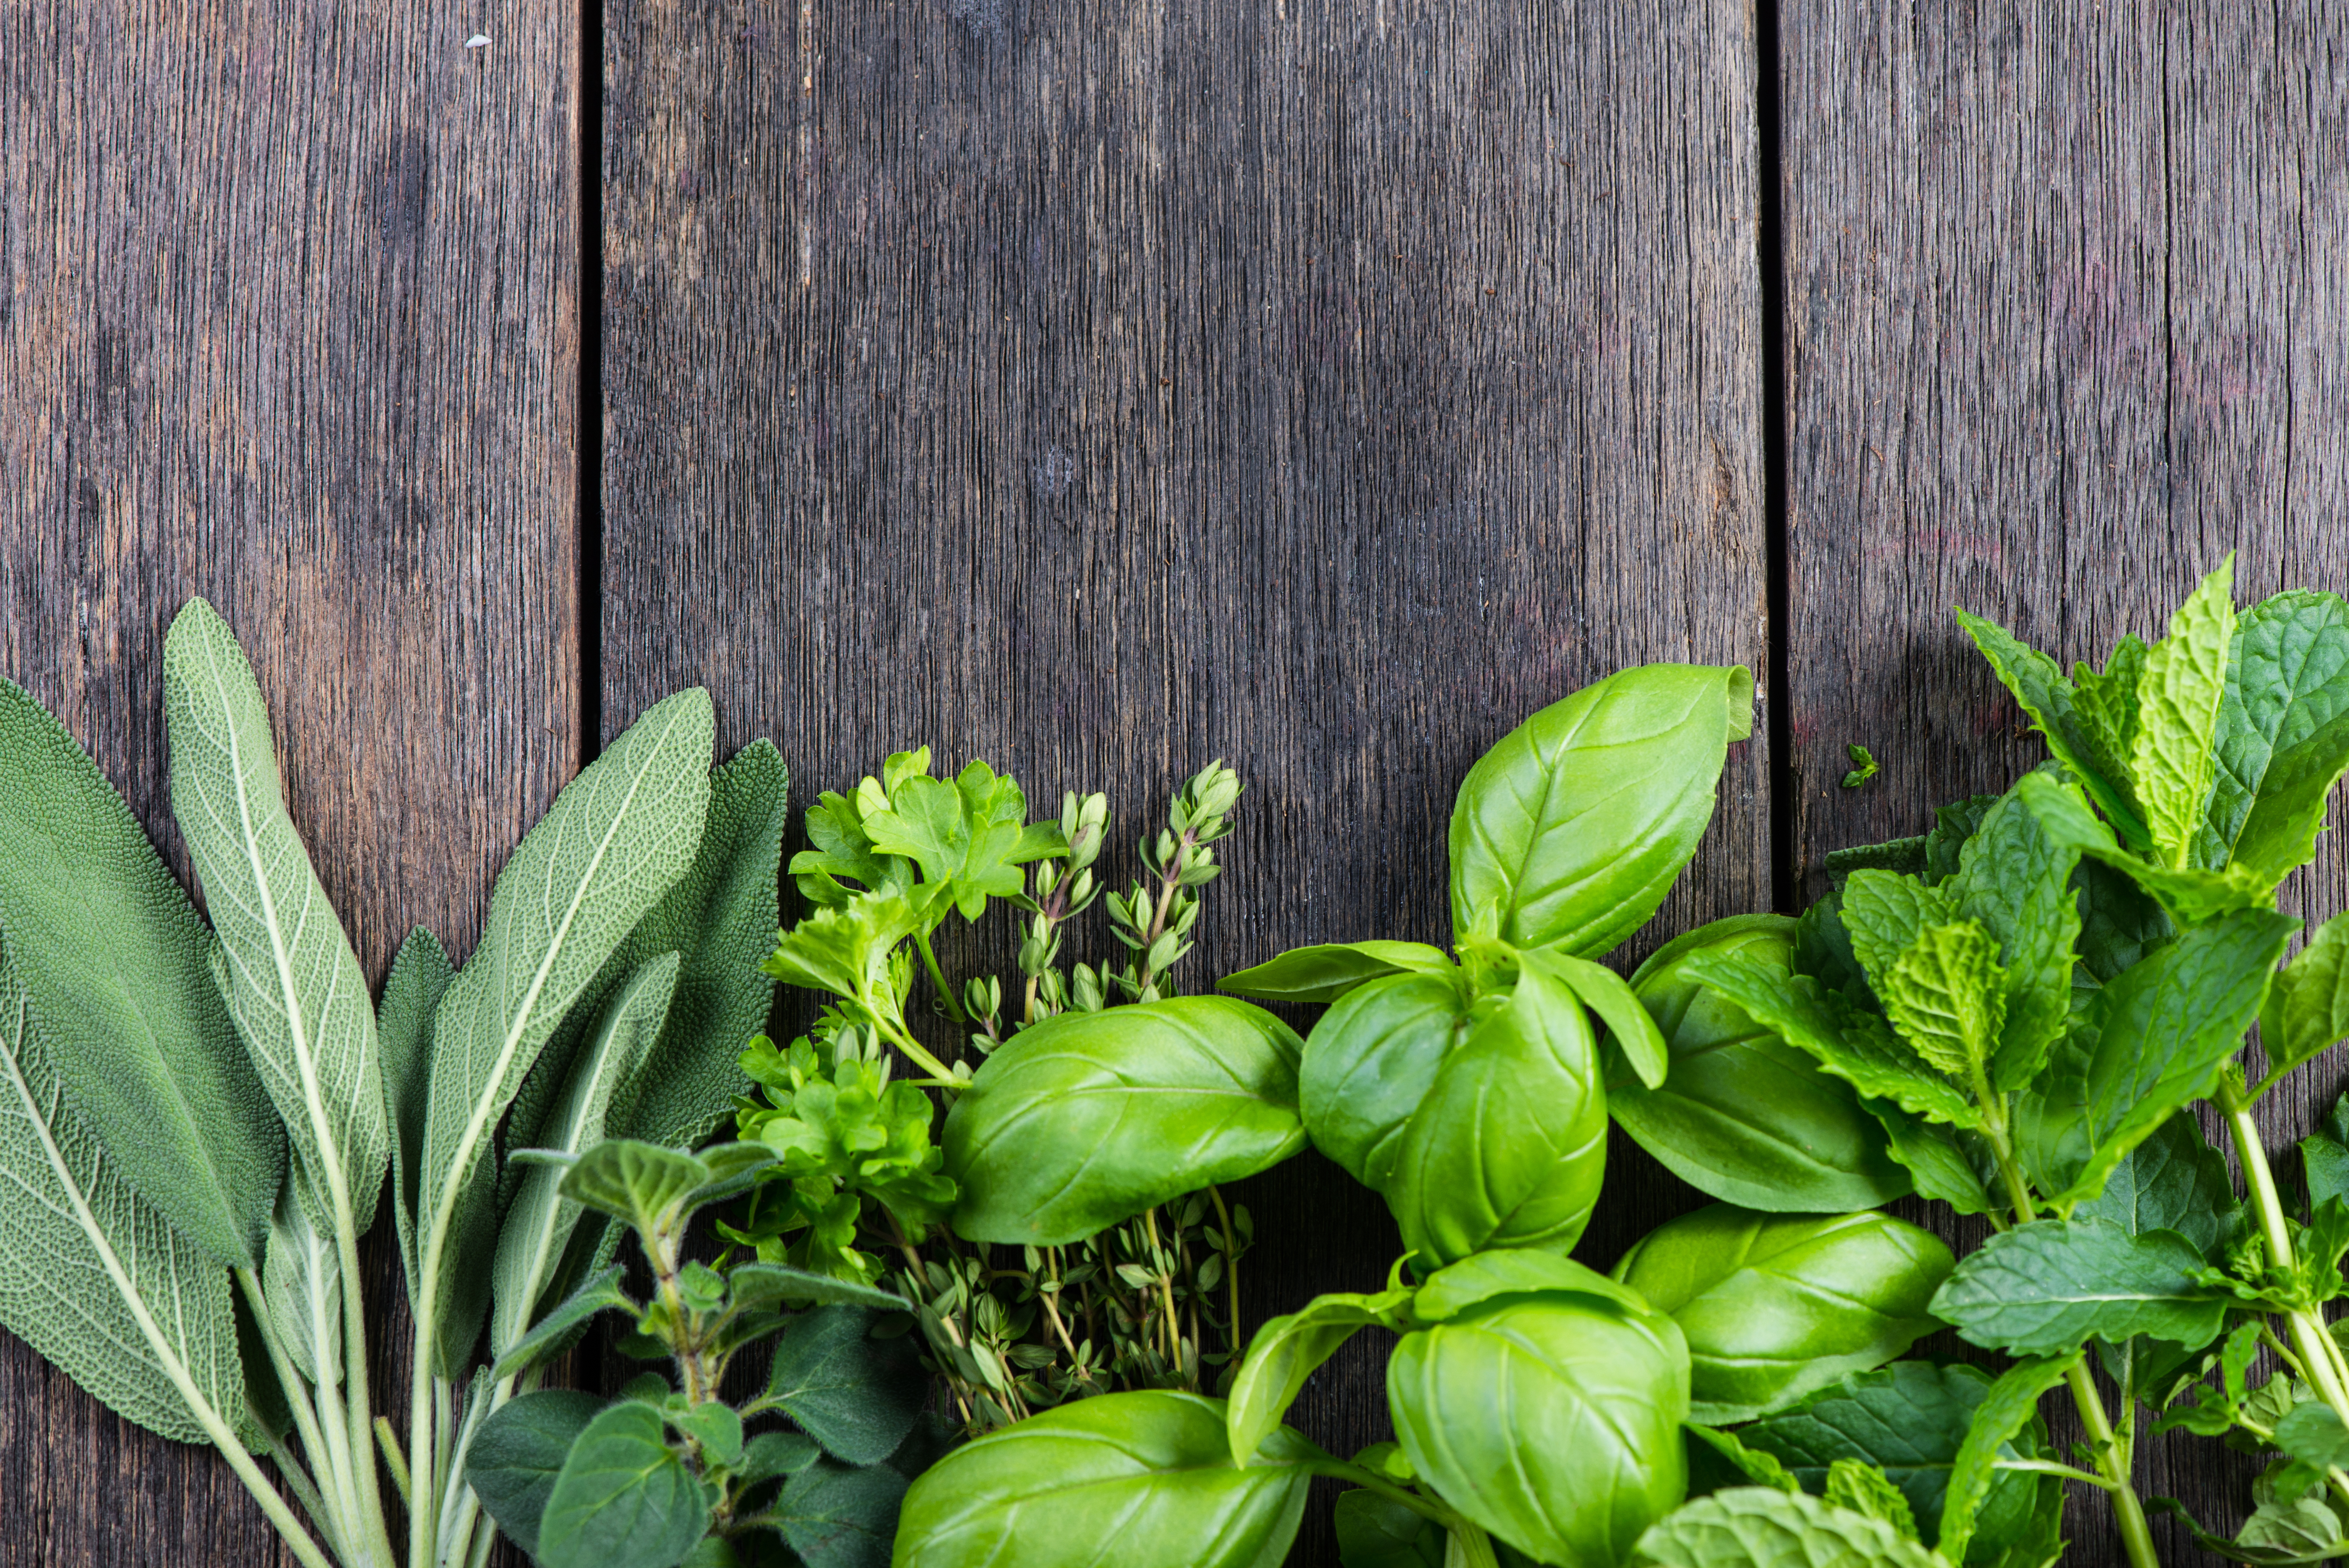 Herbs are easy to grow and are good for your health and wellbeing.